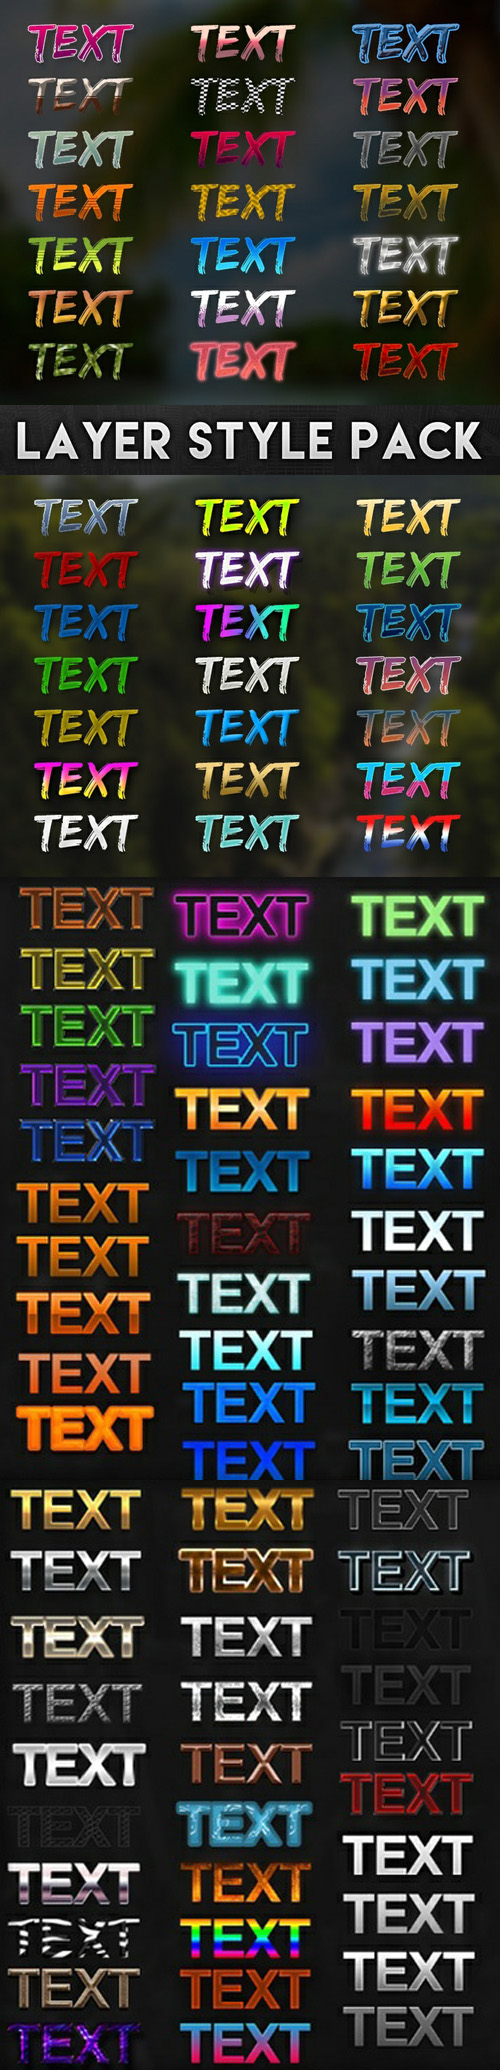 152 Text Styles for Photoshop